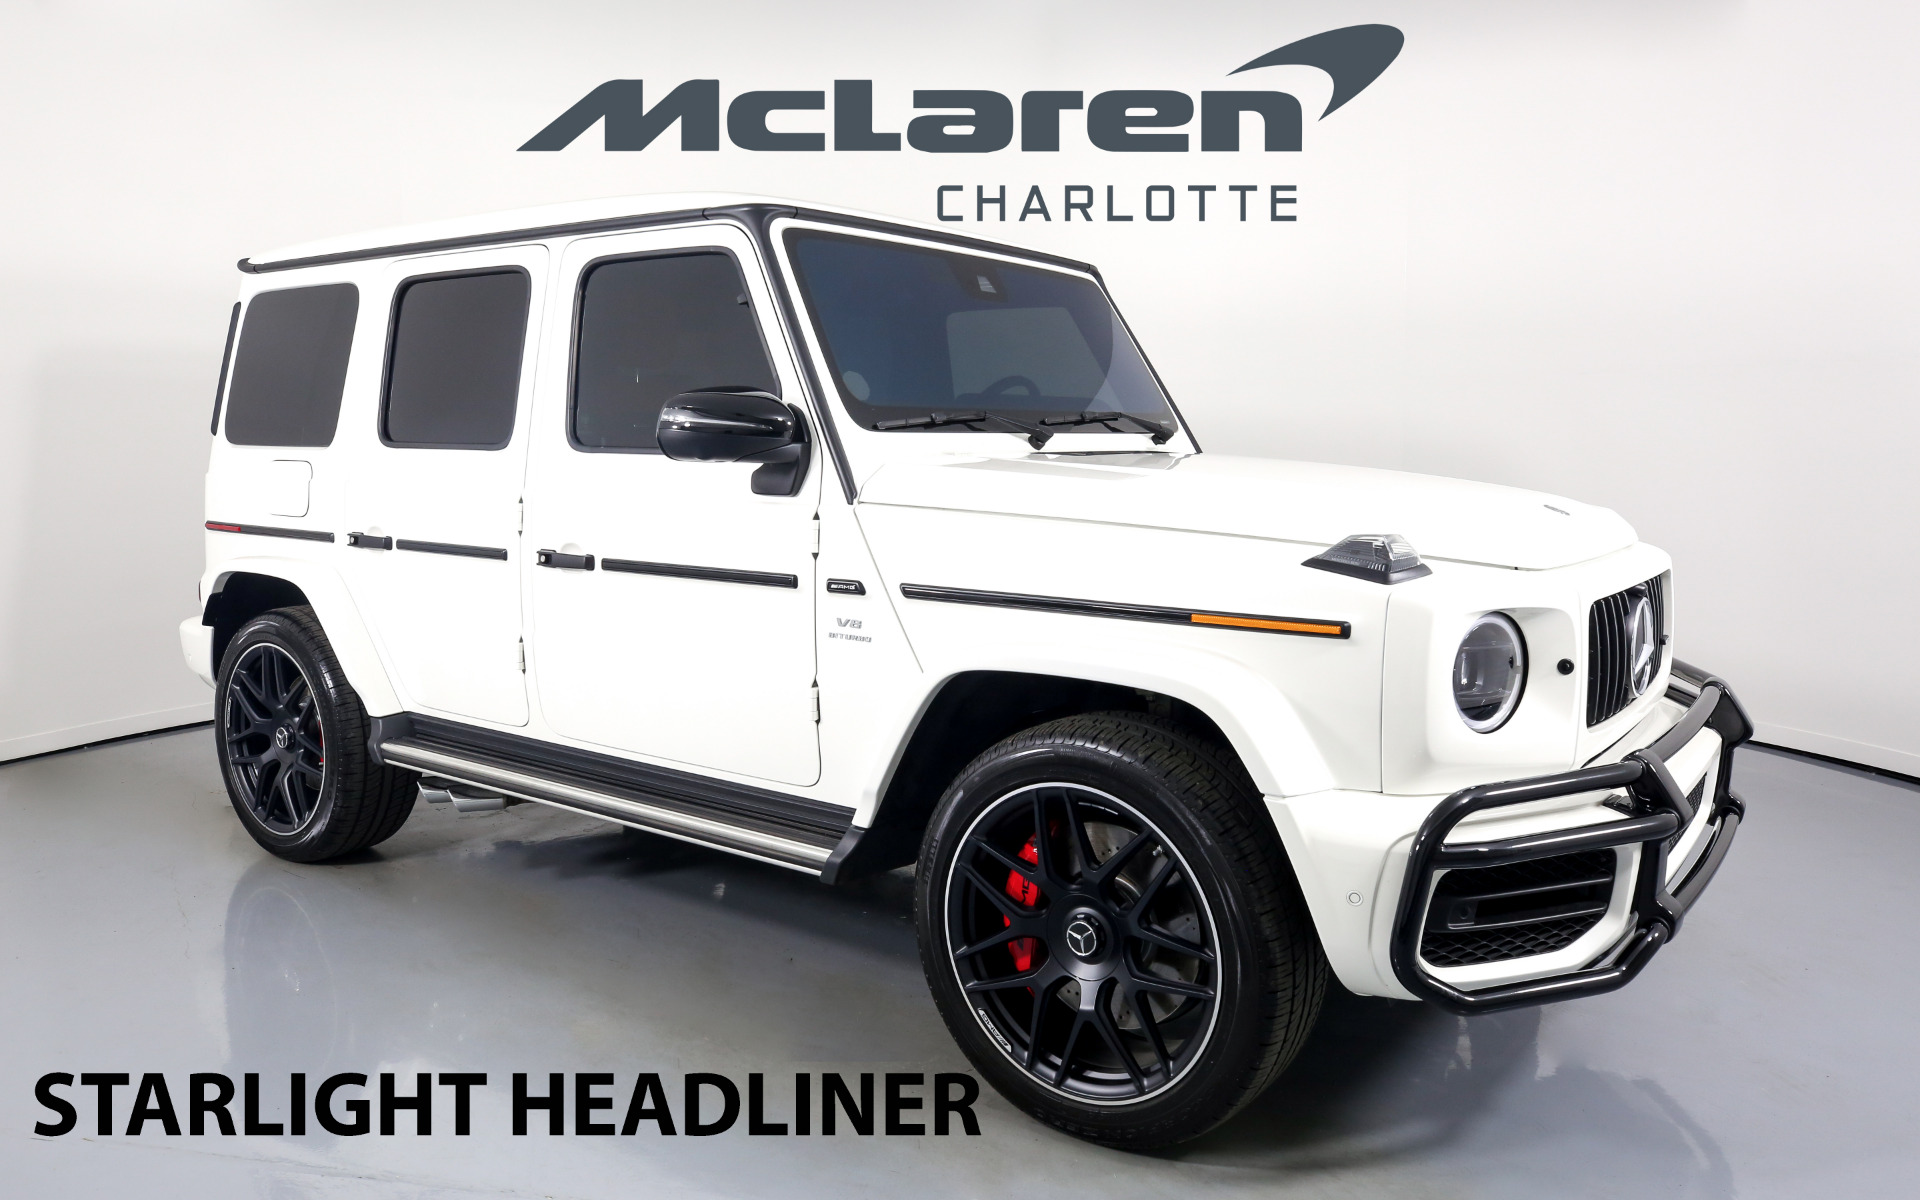 Used Mercedes Benz G Class Amg G 63 For Sale 249 996 Mclaren Charlotte Stock